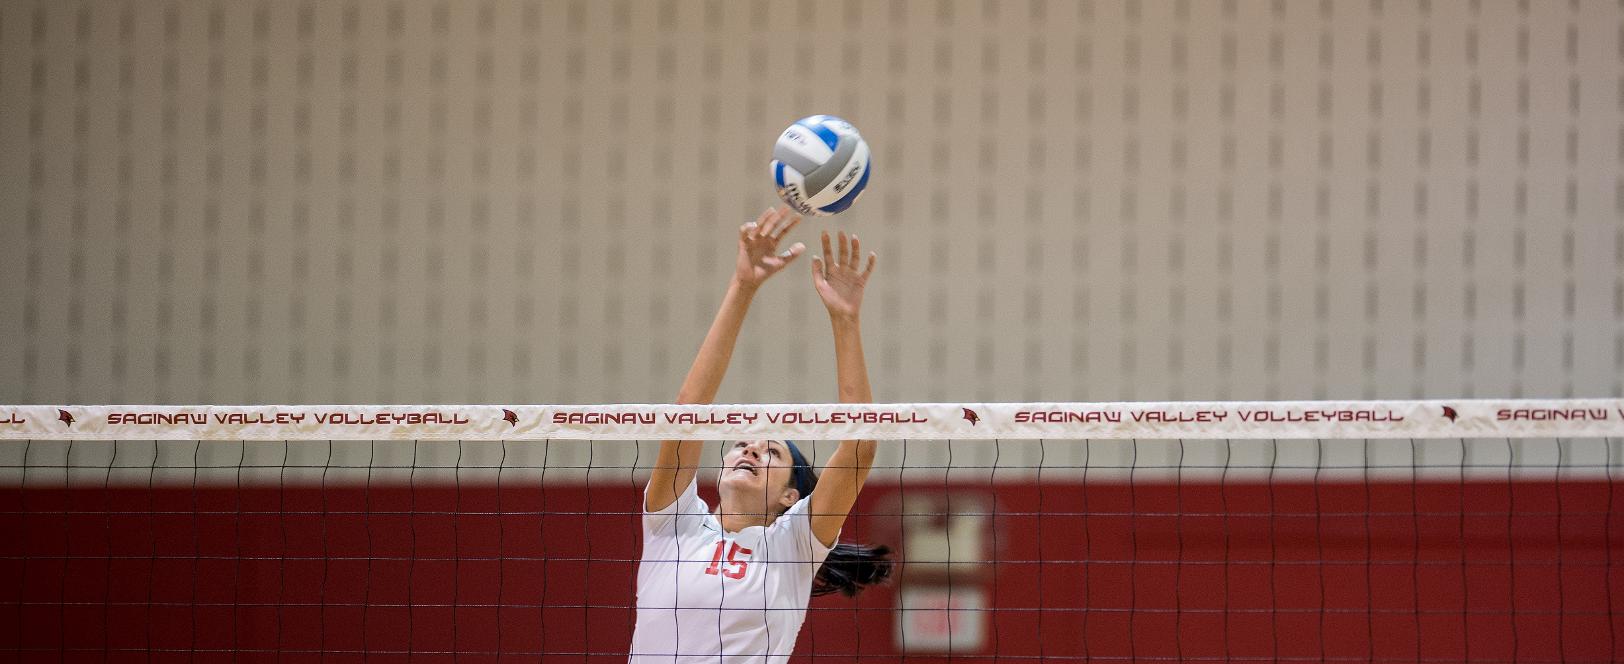 Victory Over Michigan Tech Gives SVSU Volleyball Fifth Straight